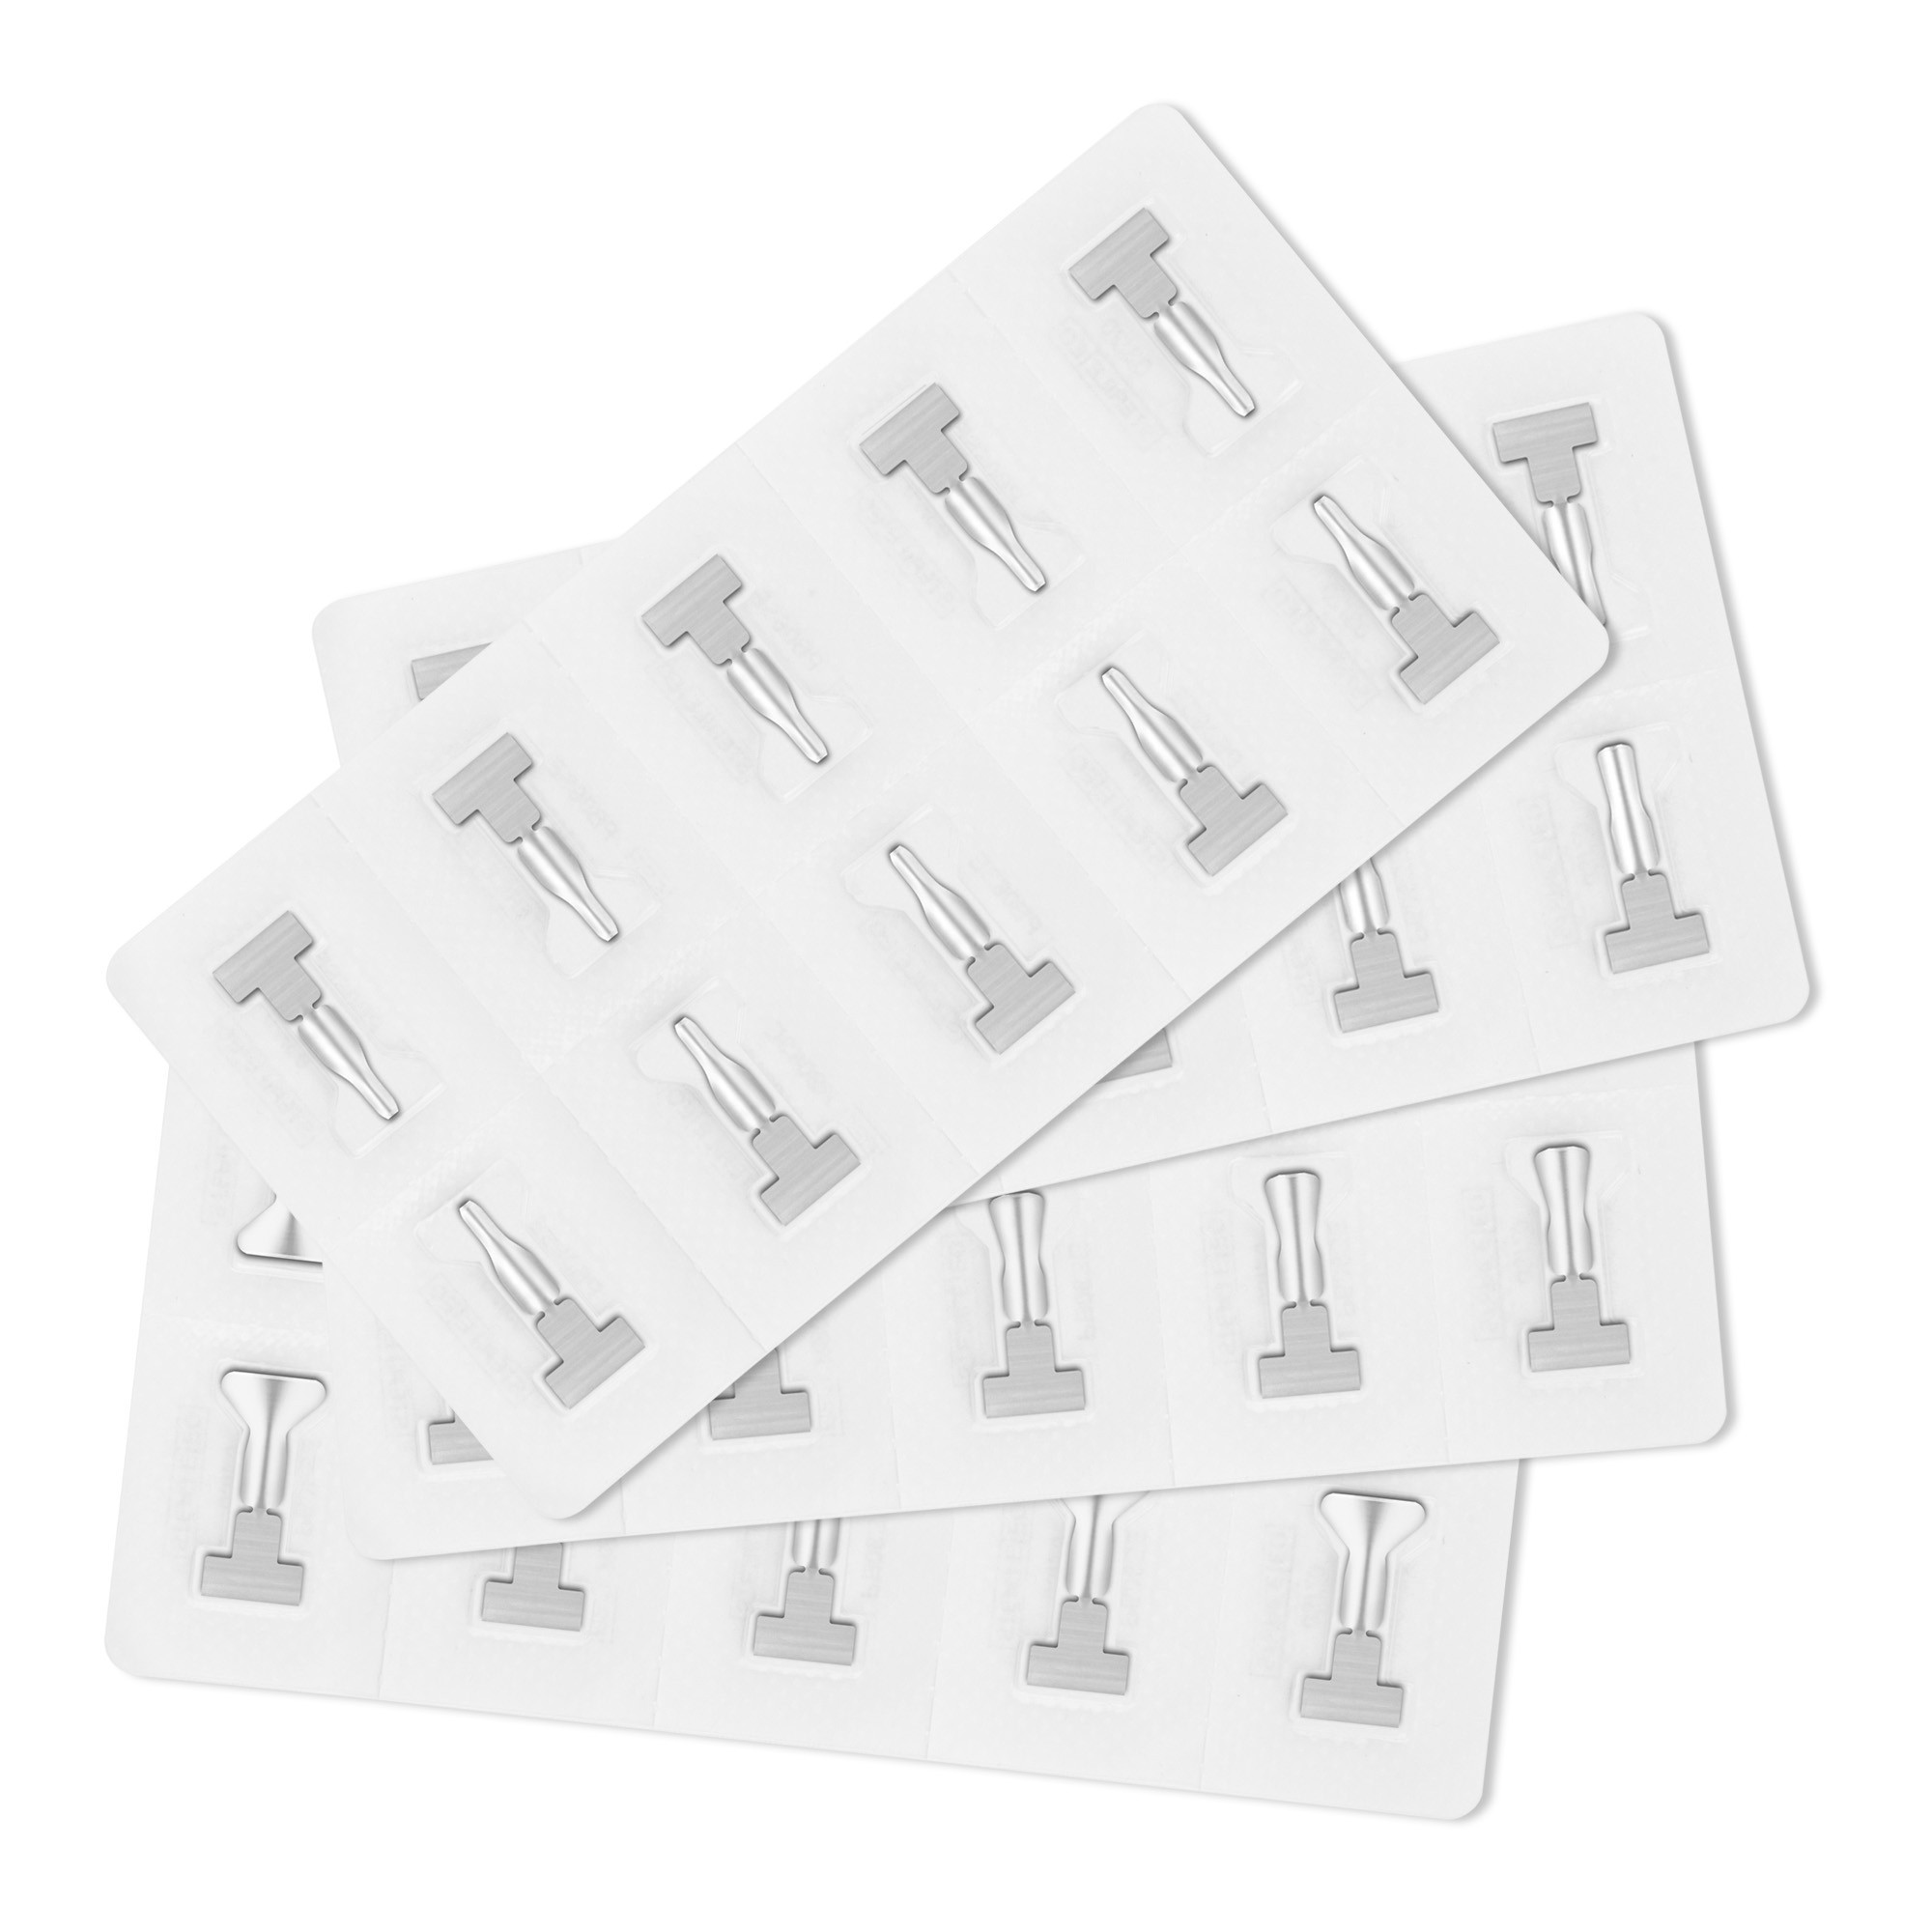 Professional single sterile disposable microblades Secure Lock assorted sizes 40 pcs